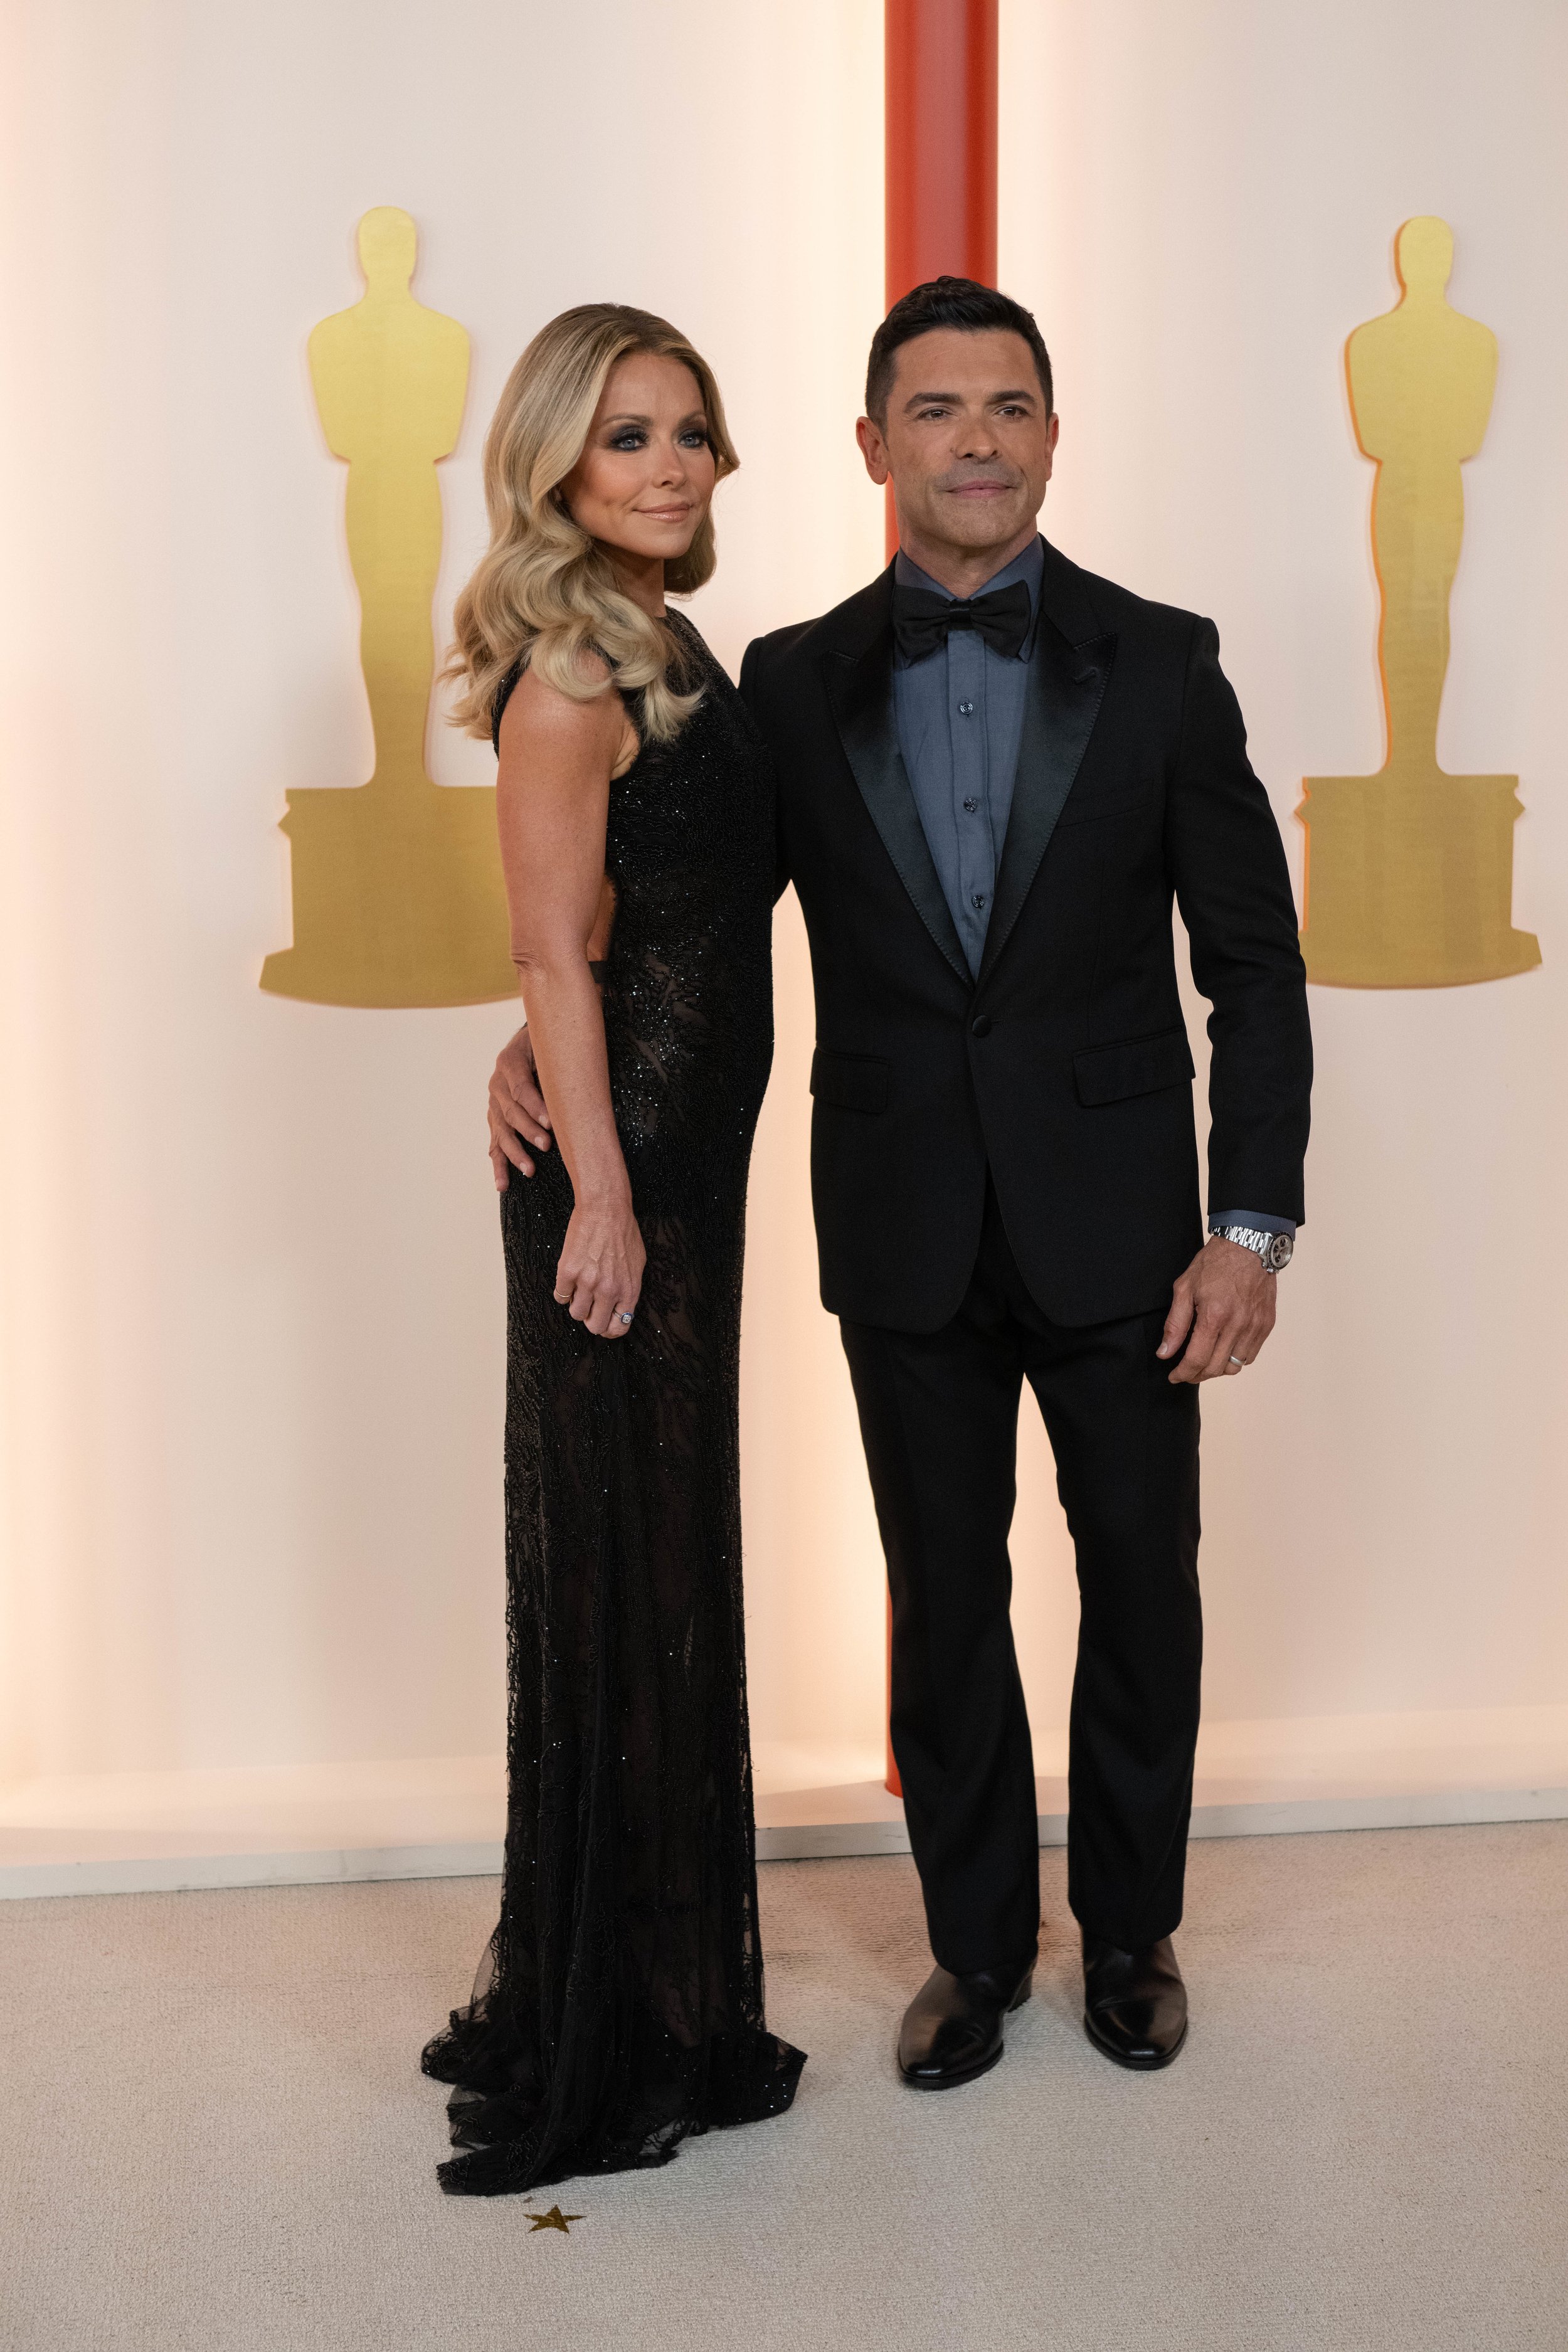 Kelly Ripa and Mark Consuelos arrive on the red carpet of the 95th Oscars